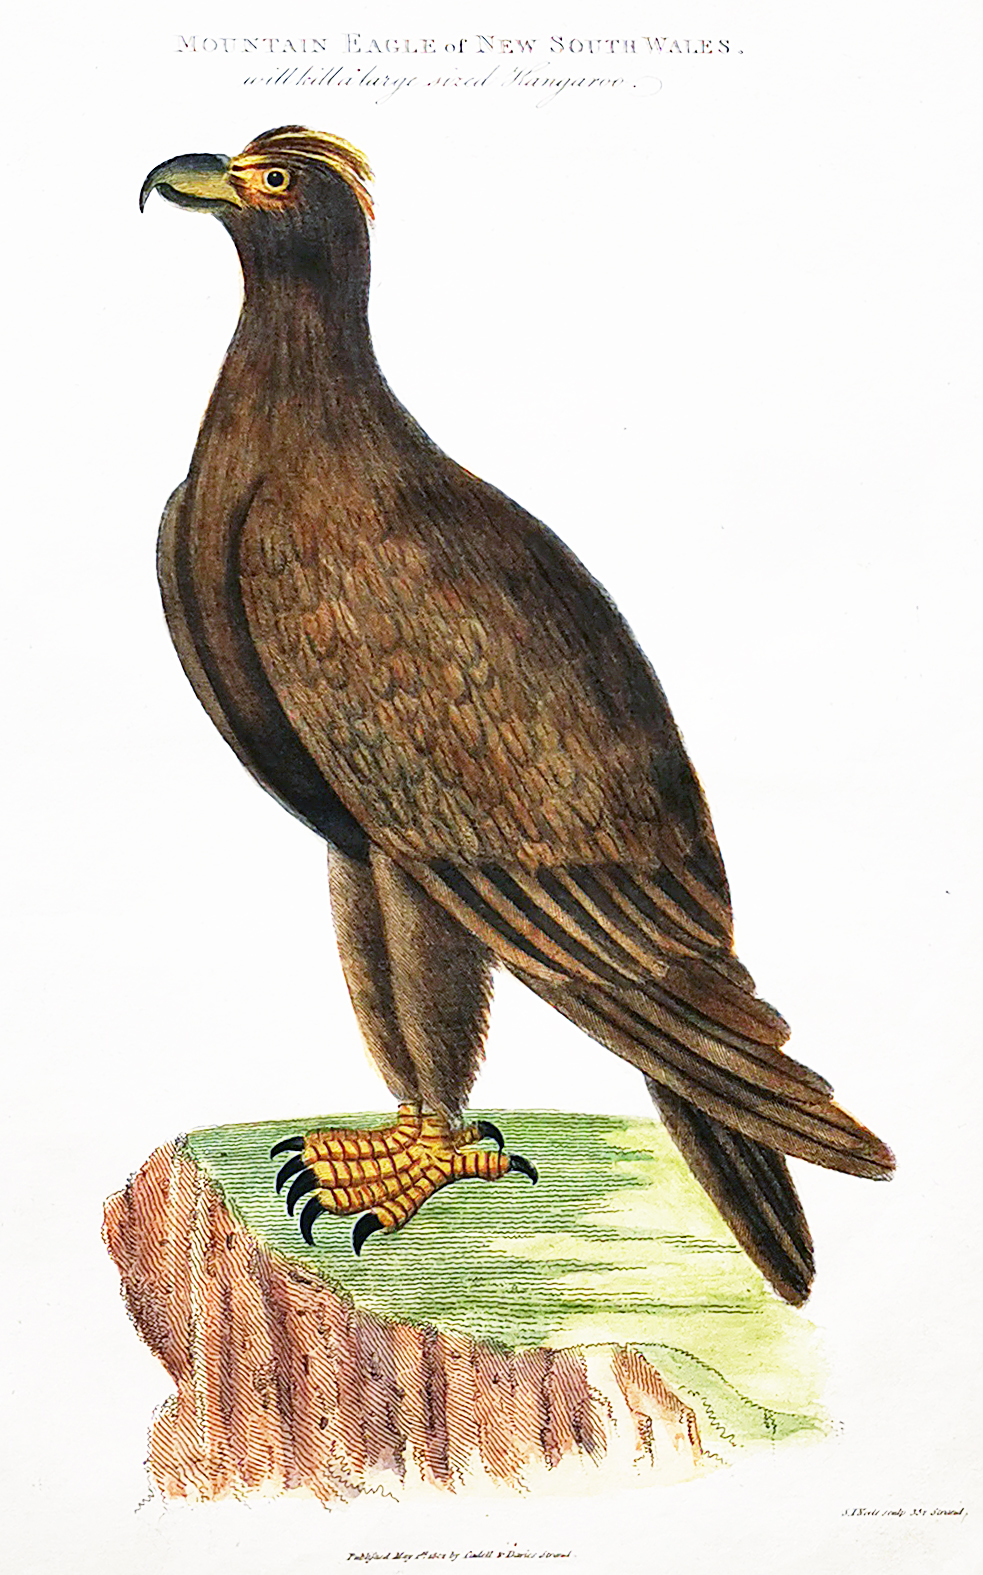 Mountain Eagle of New South Wales. will kill a large sized Kangaroo. - Antique Print from 1802